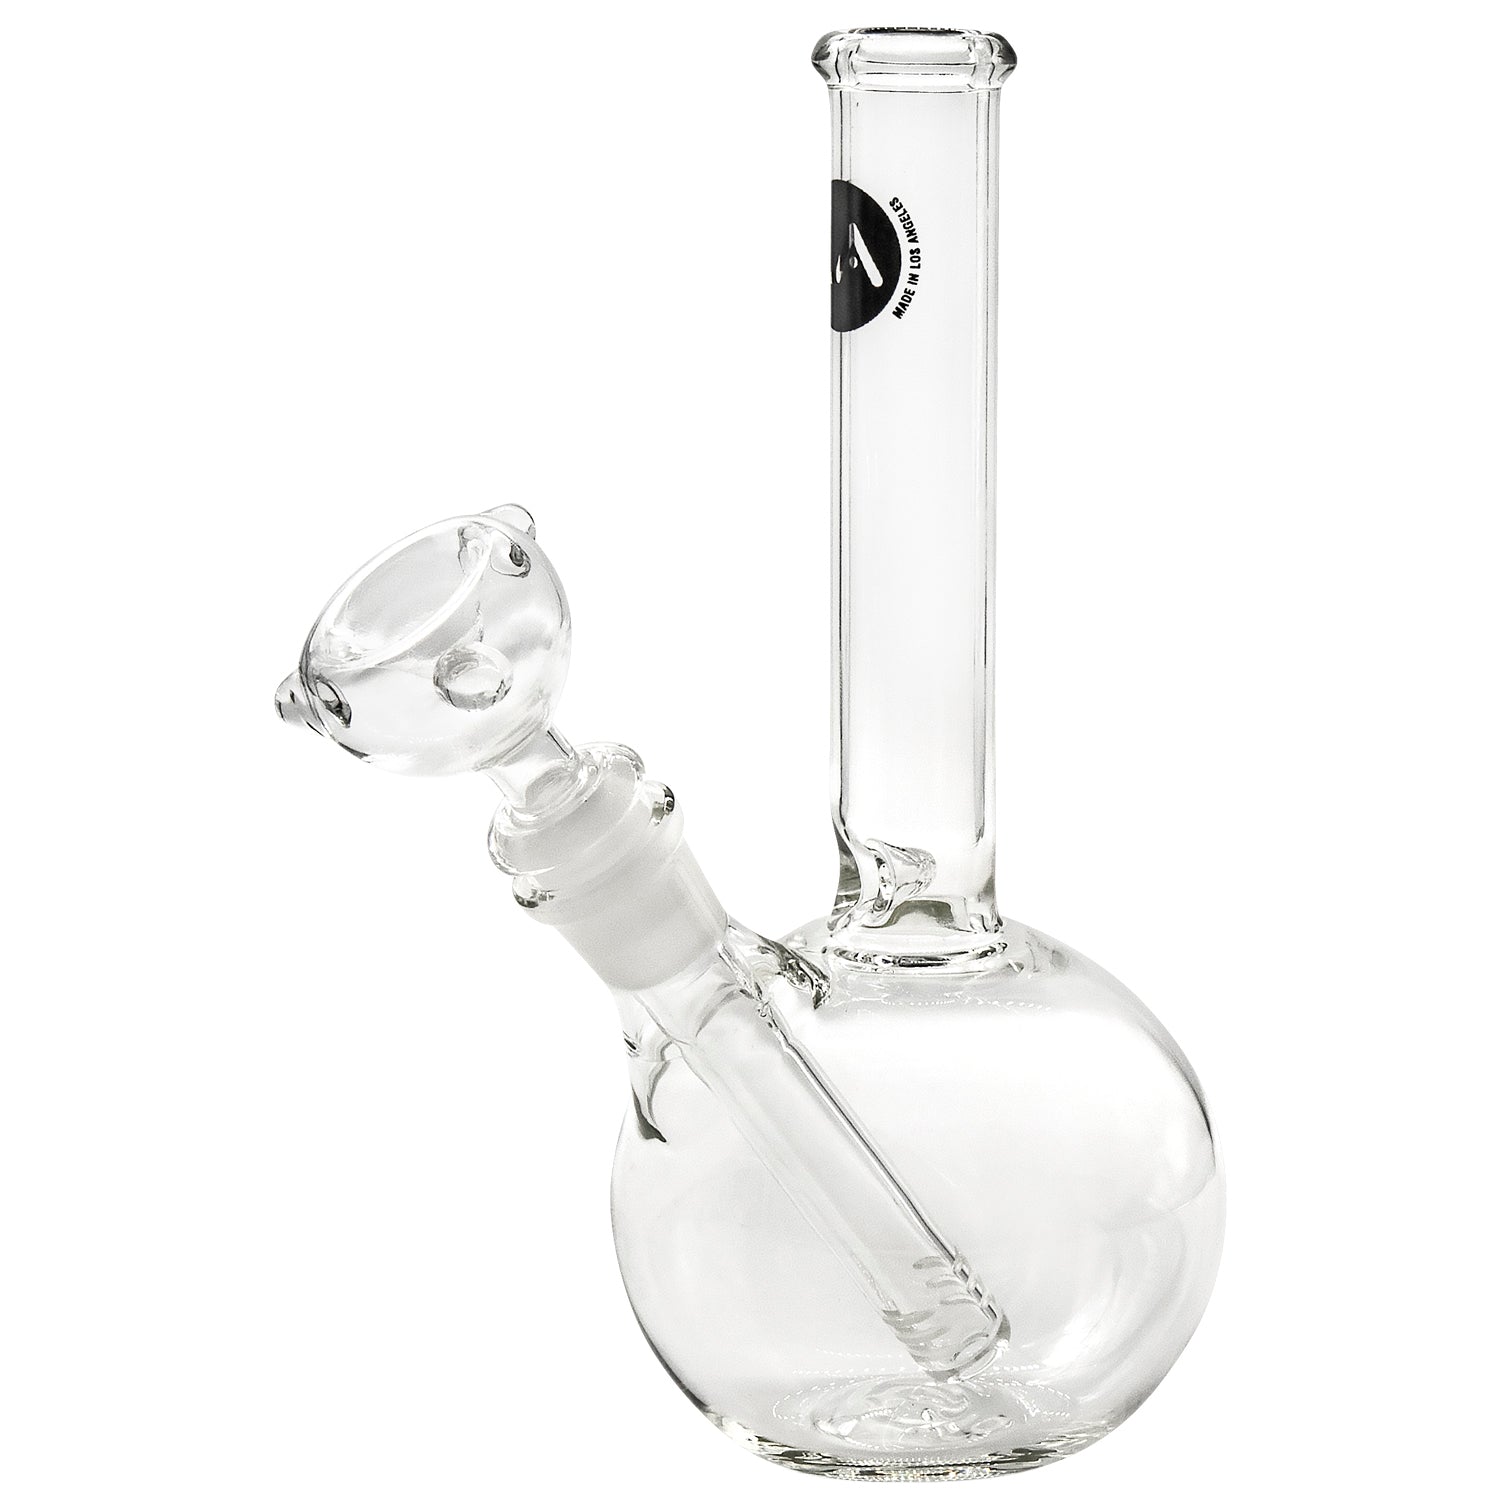 How to Clean a Glass Bong or Water Pipe in 5 Easy Steps - The Dab Lab